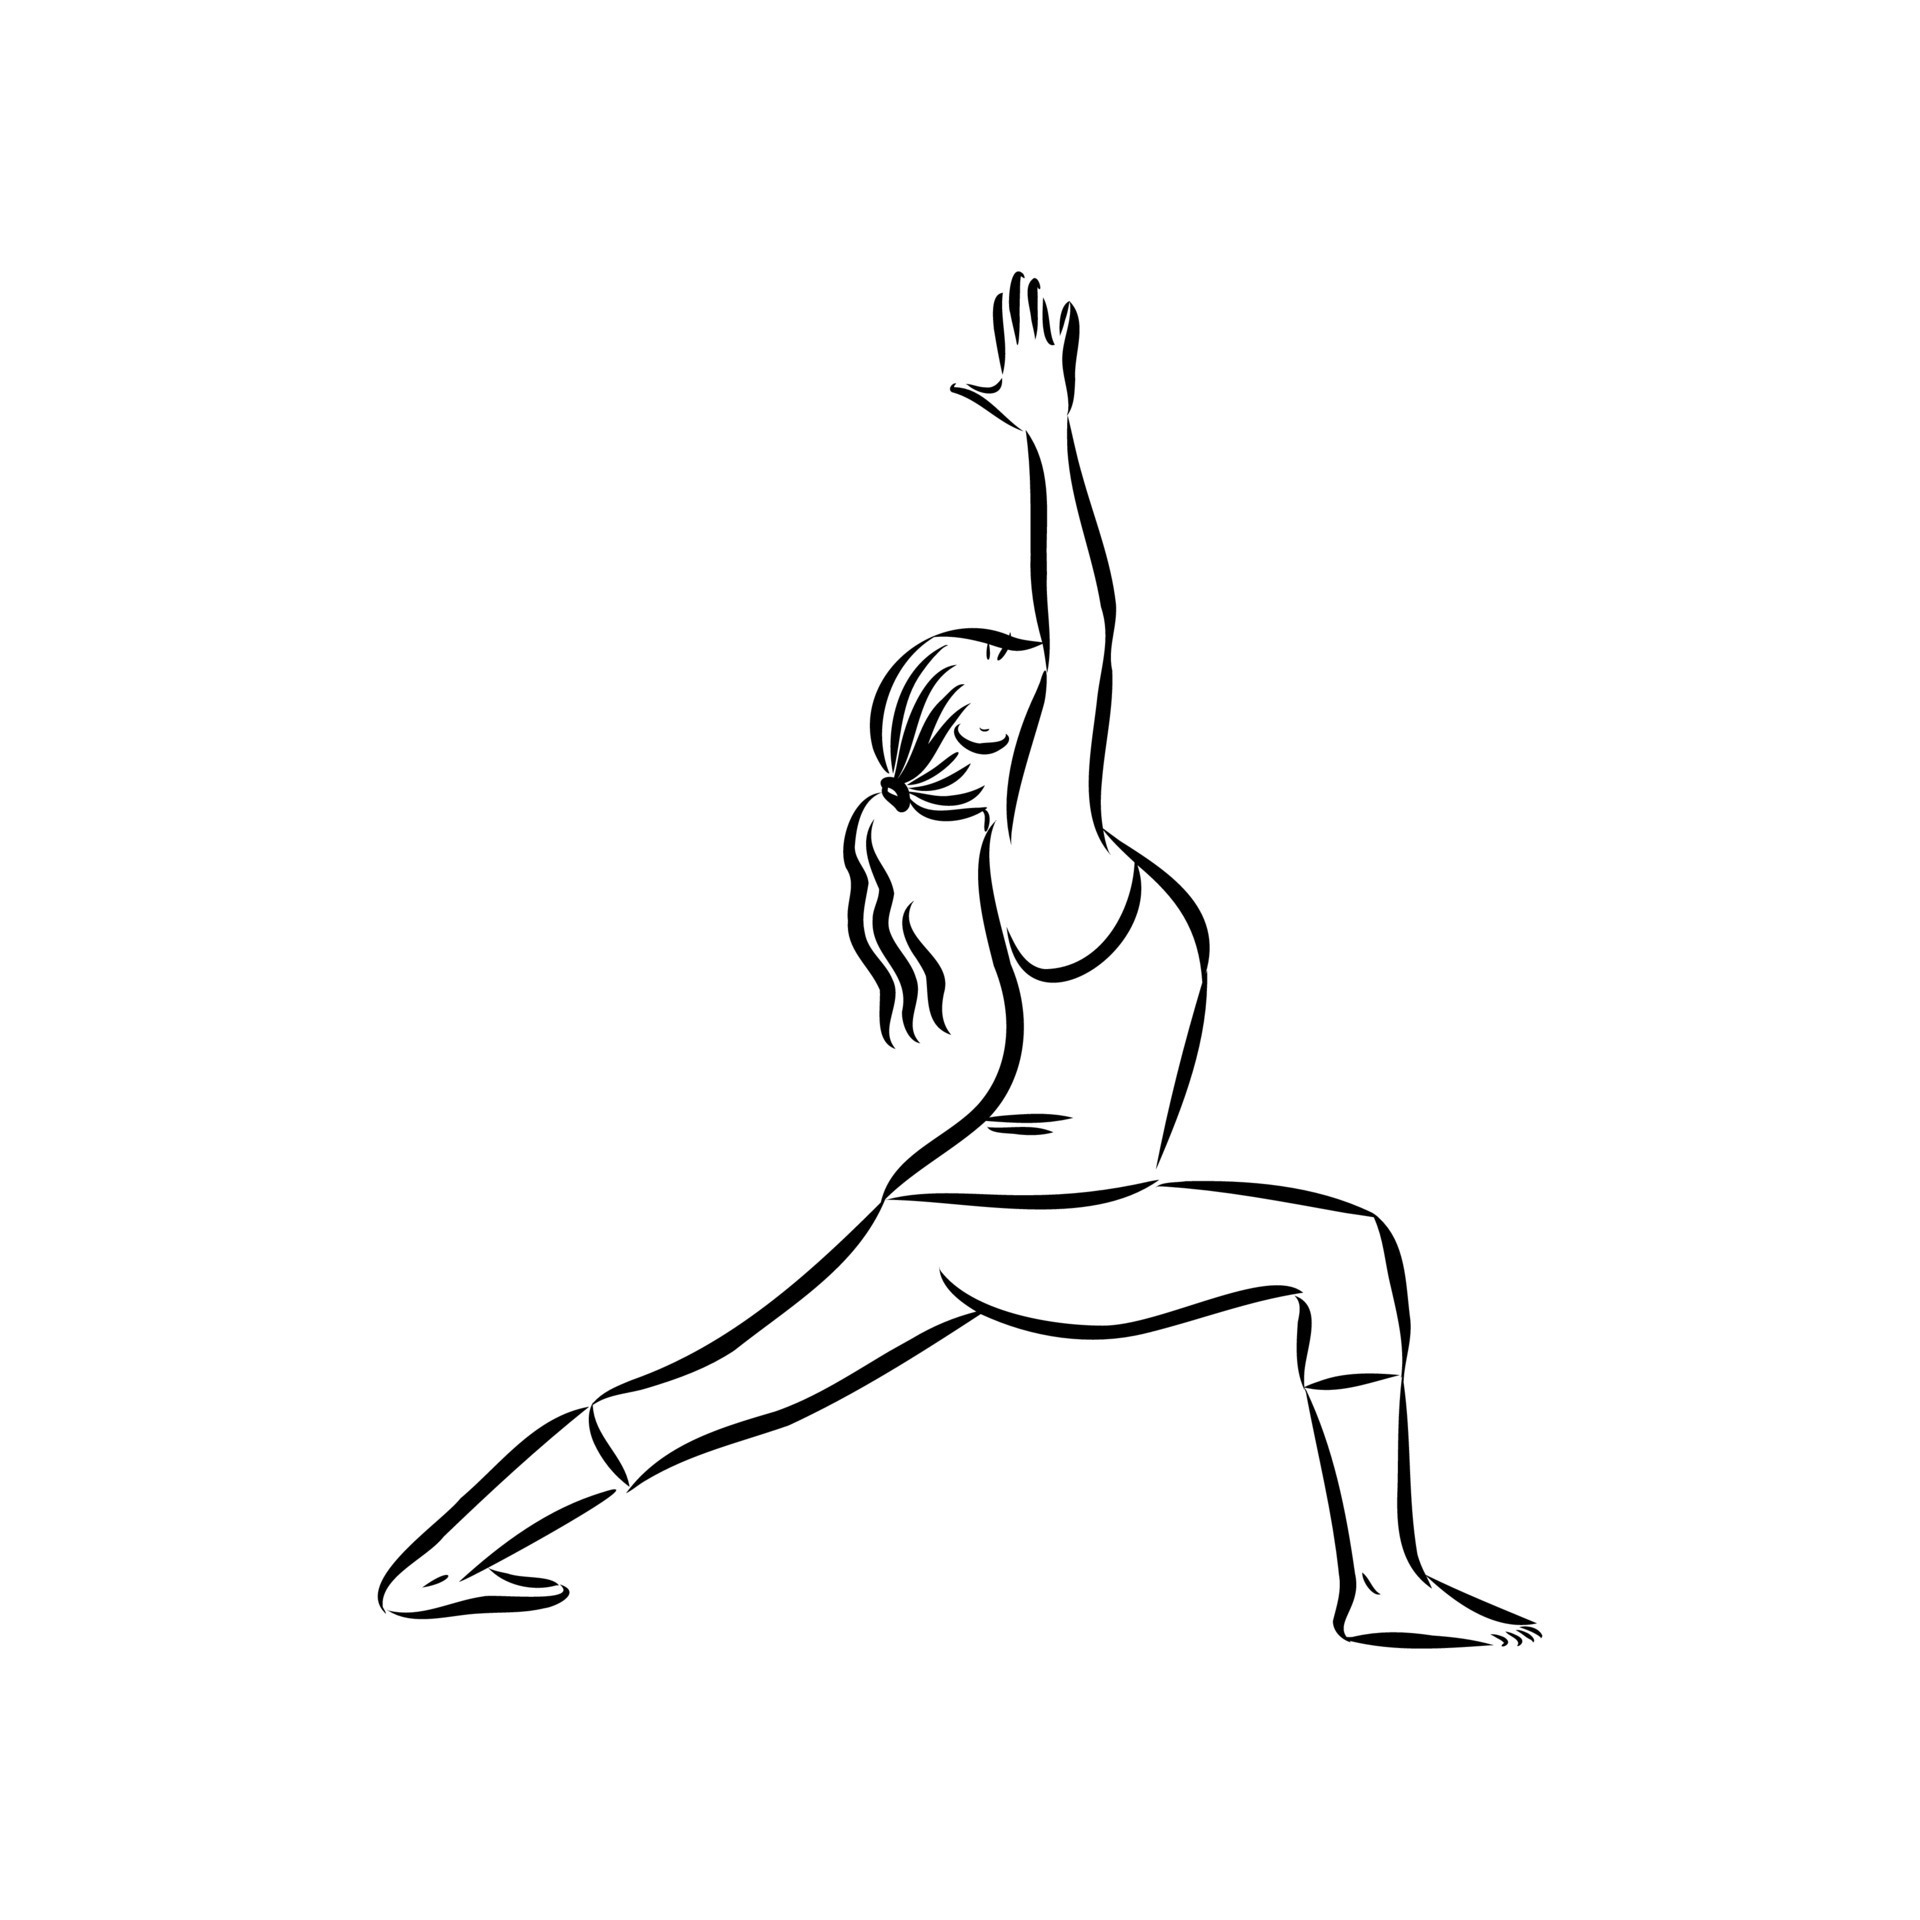 Yoga poses. Set of various yoga poses looking like a pencil drawing sketch.  | CanStock